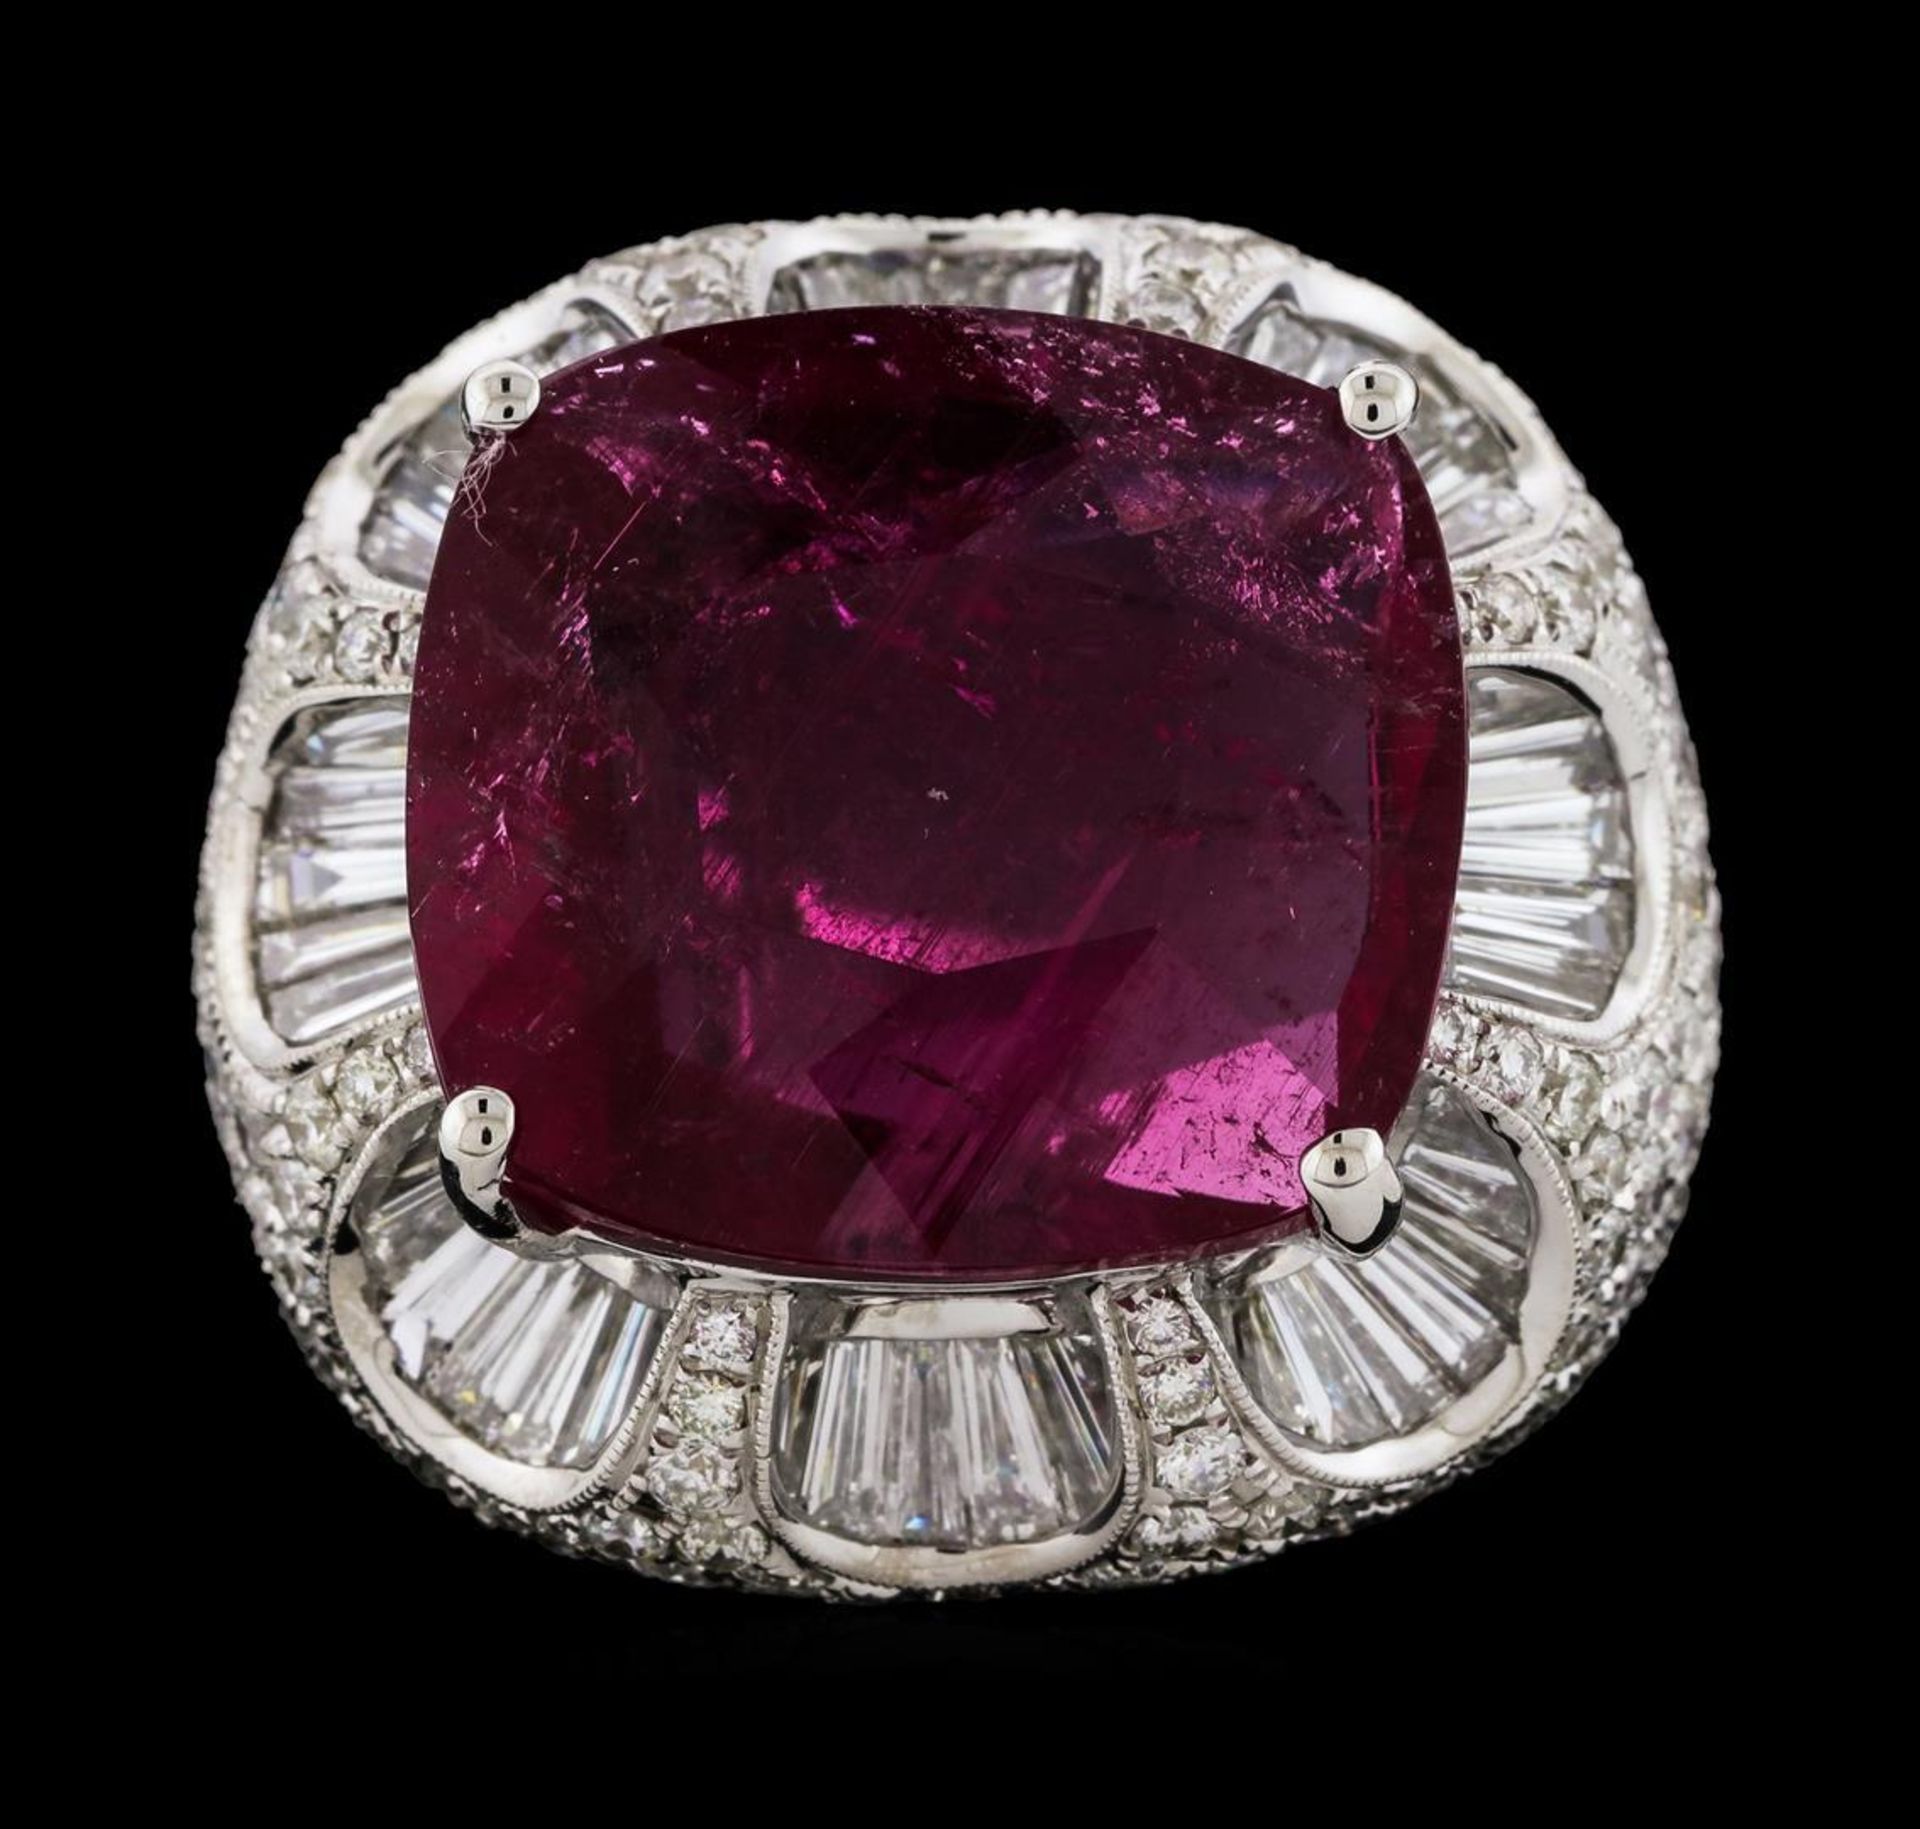 17.68 ctw Pink Tourmaline and Diamond Ring - 18KT White Gold - Image 2 of 5